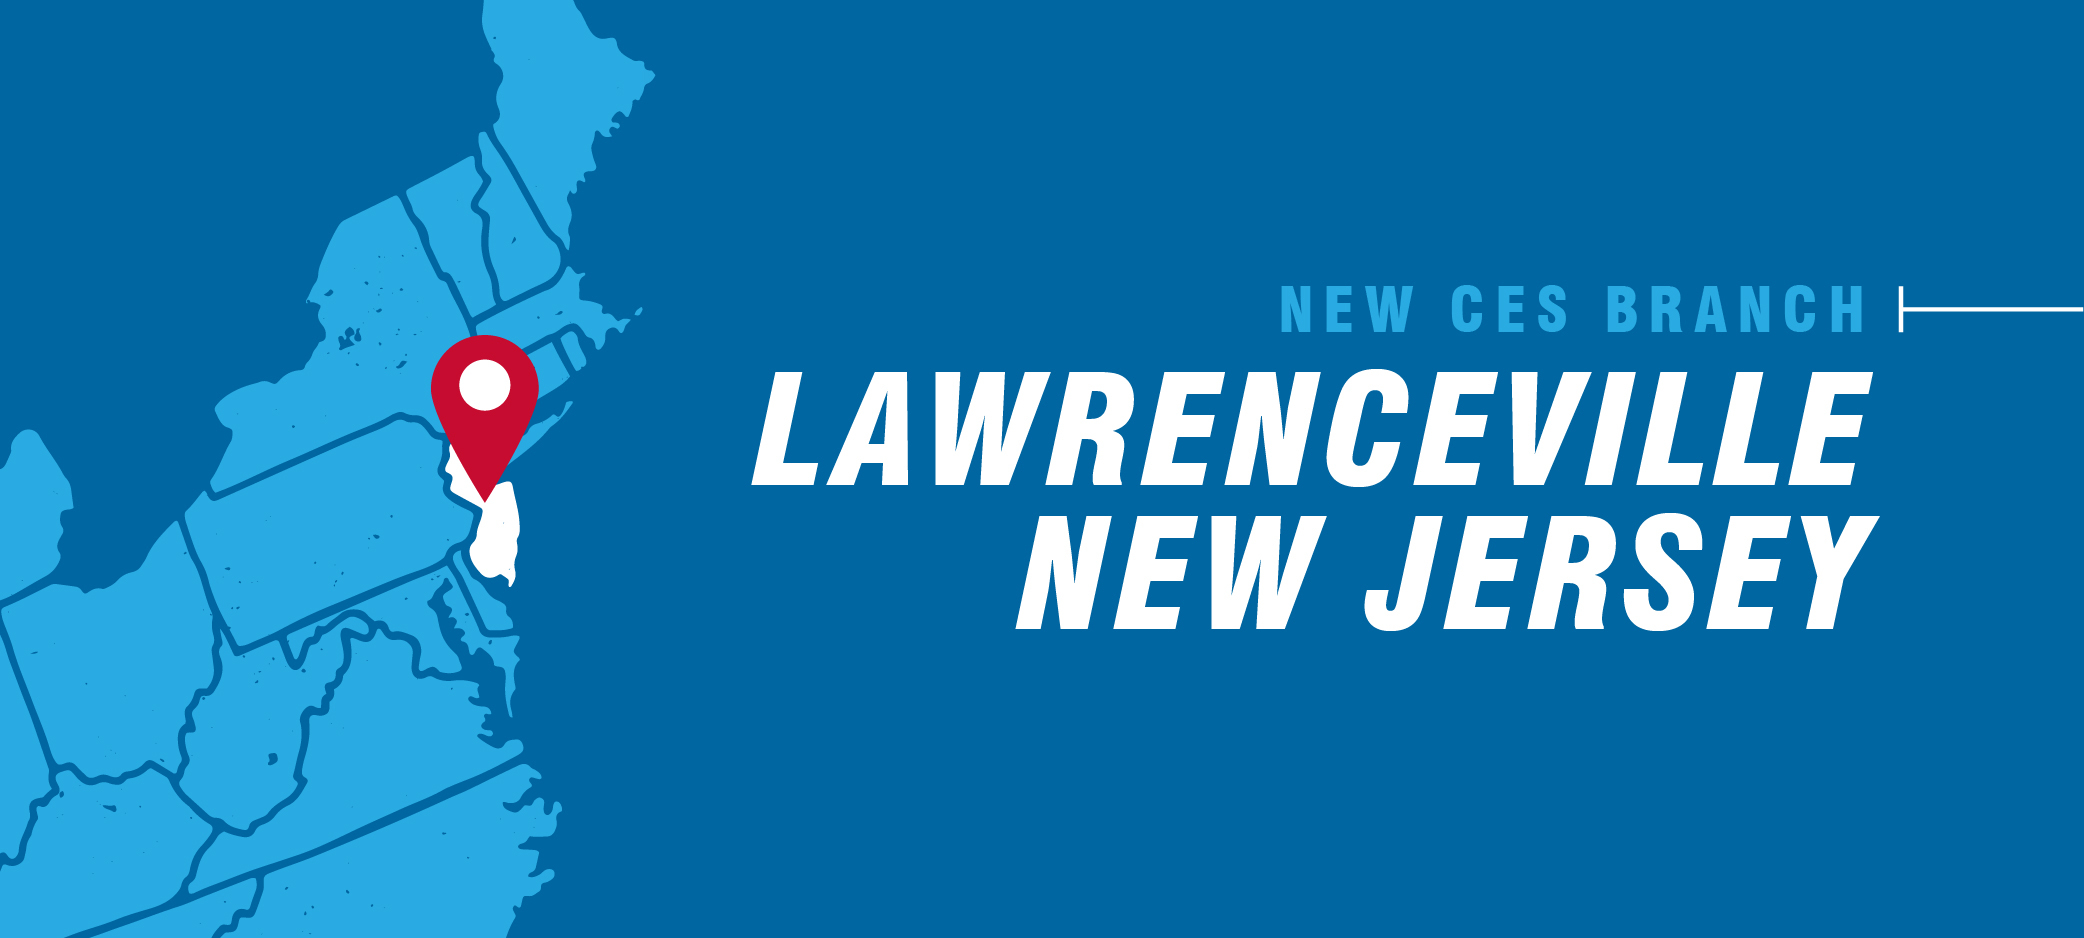 CES Lawrenceville, NJ: Experienced Branch Finds New Opportunity for ...